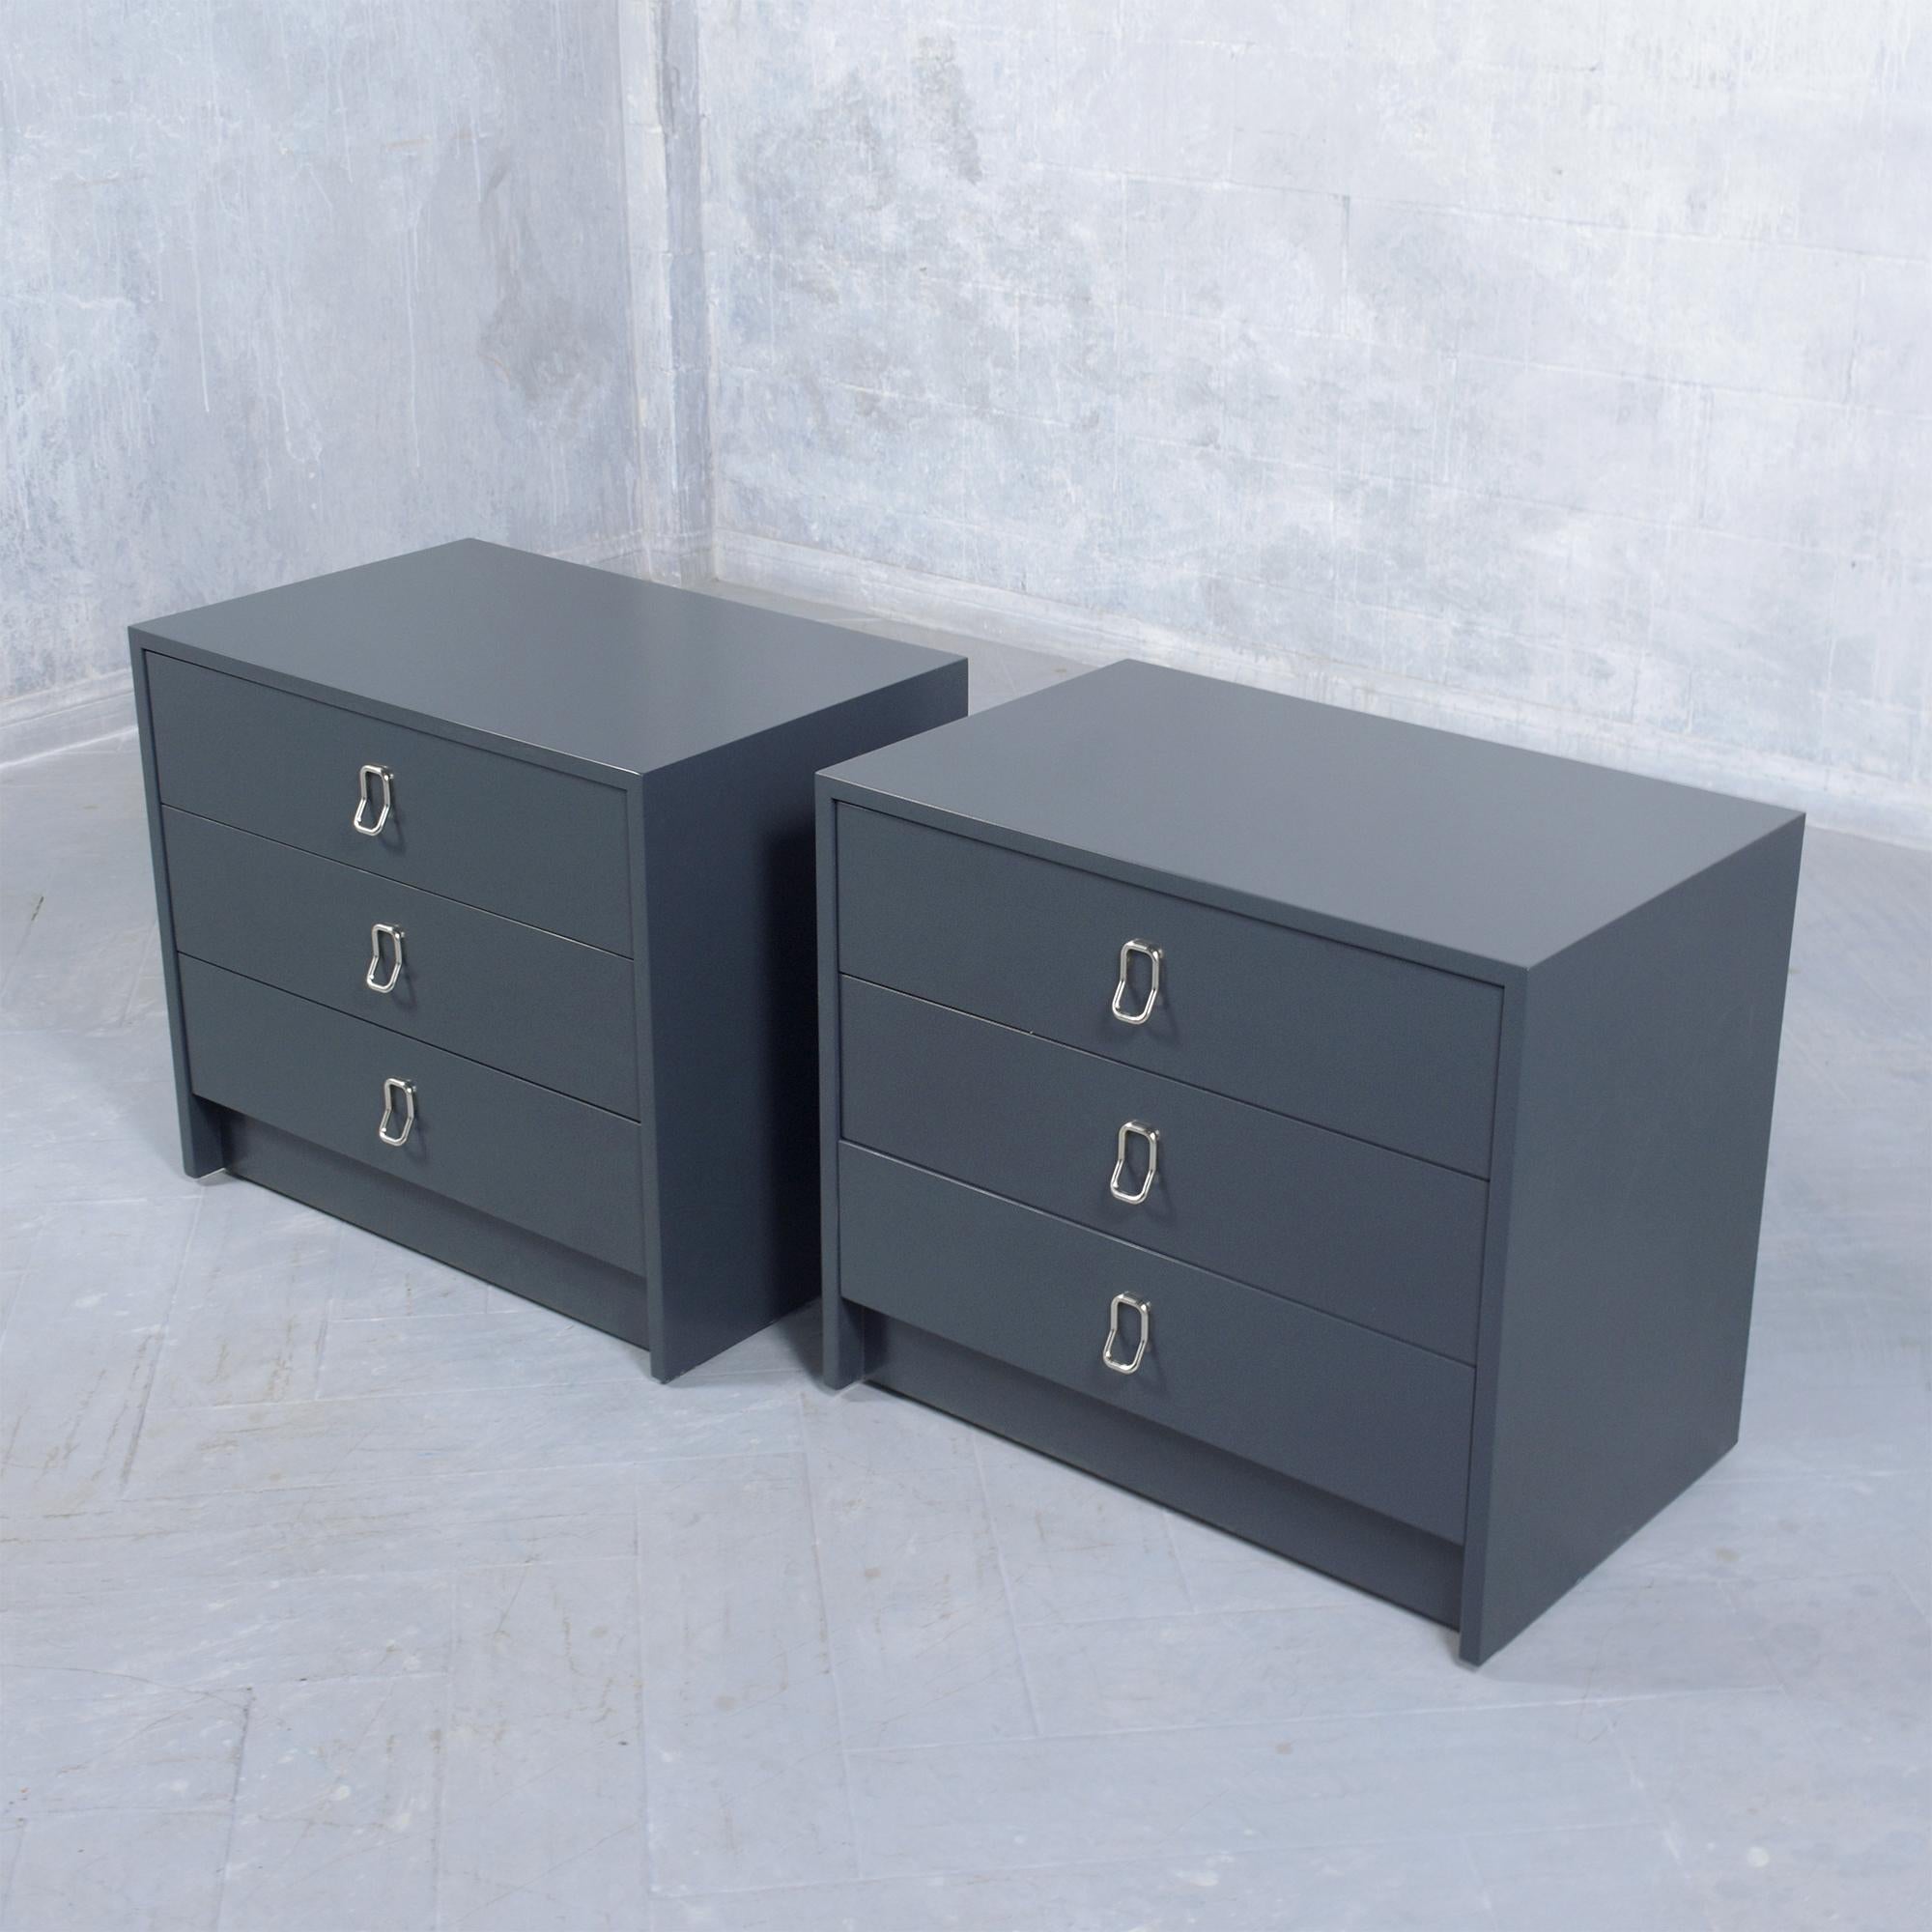 Step into the stylish world of the 1960s with this extraordinary pair of mid-century nightstands designed by the iconic Milo Baughman for Thayer Coggin. Beautifully handcrafted and in exceptional condition, these nightstands have undergone